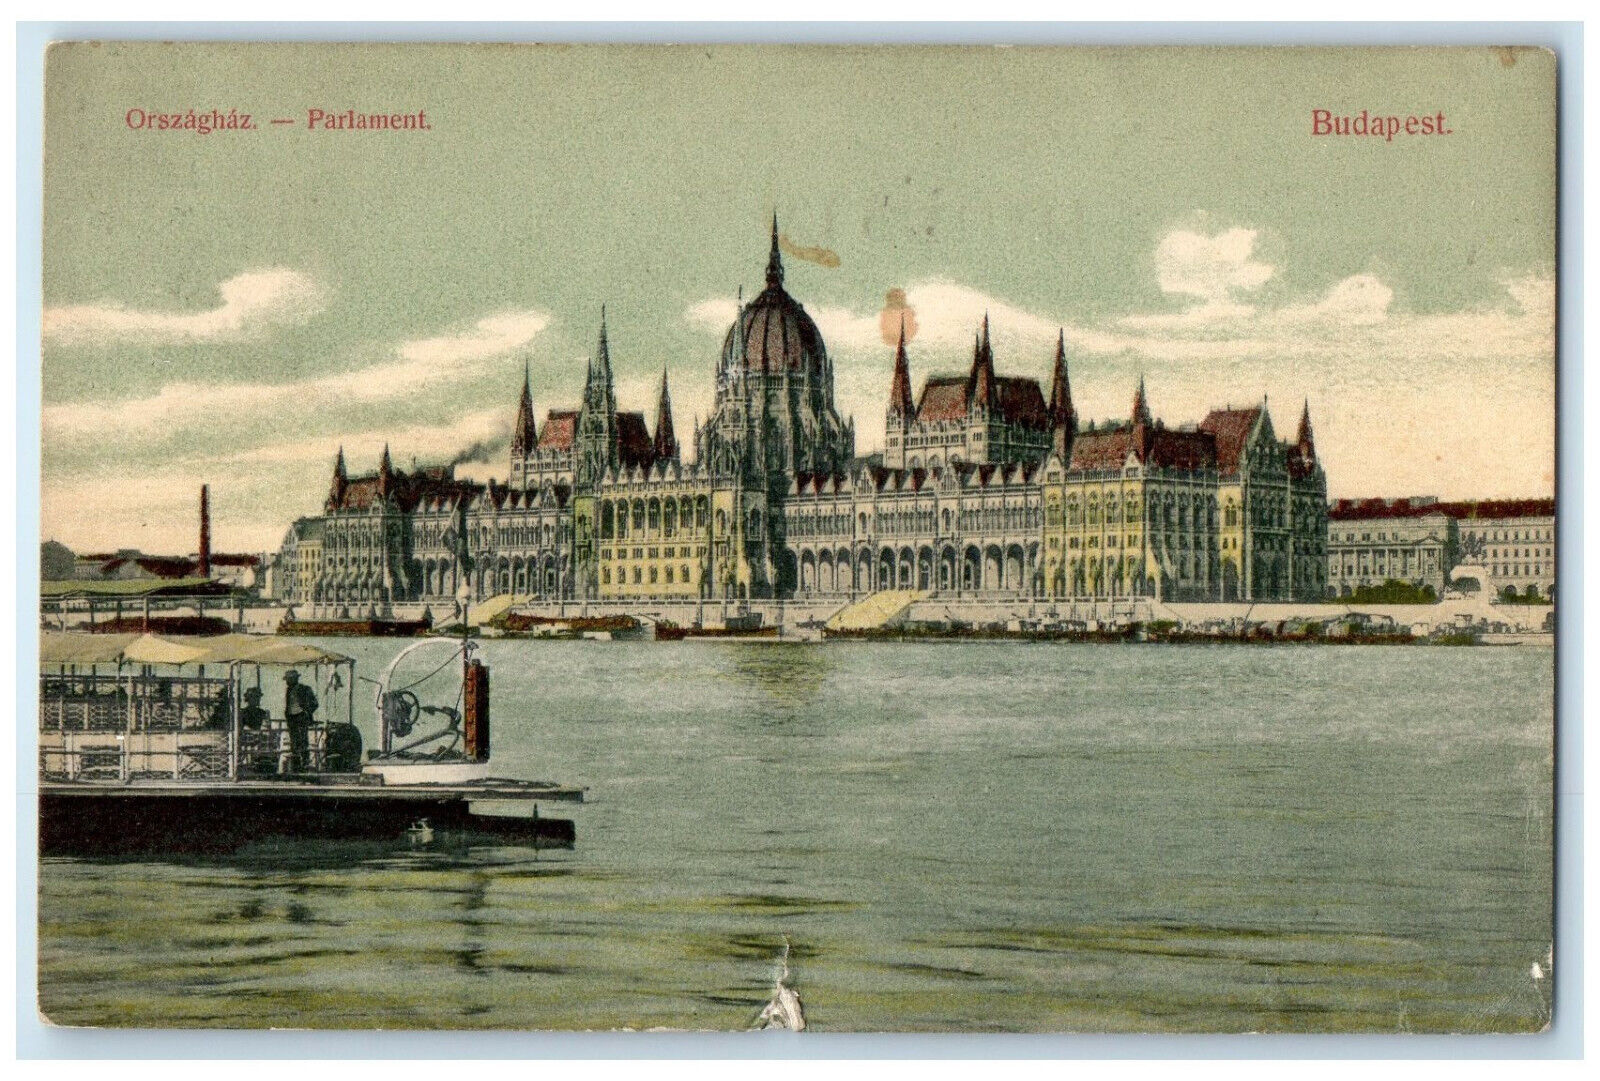 1908 Boat Scene Orszaghaz Parlament Budapest Hungary Antique Posted Postcard